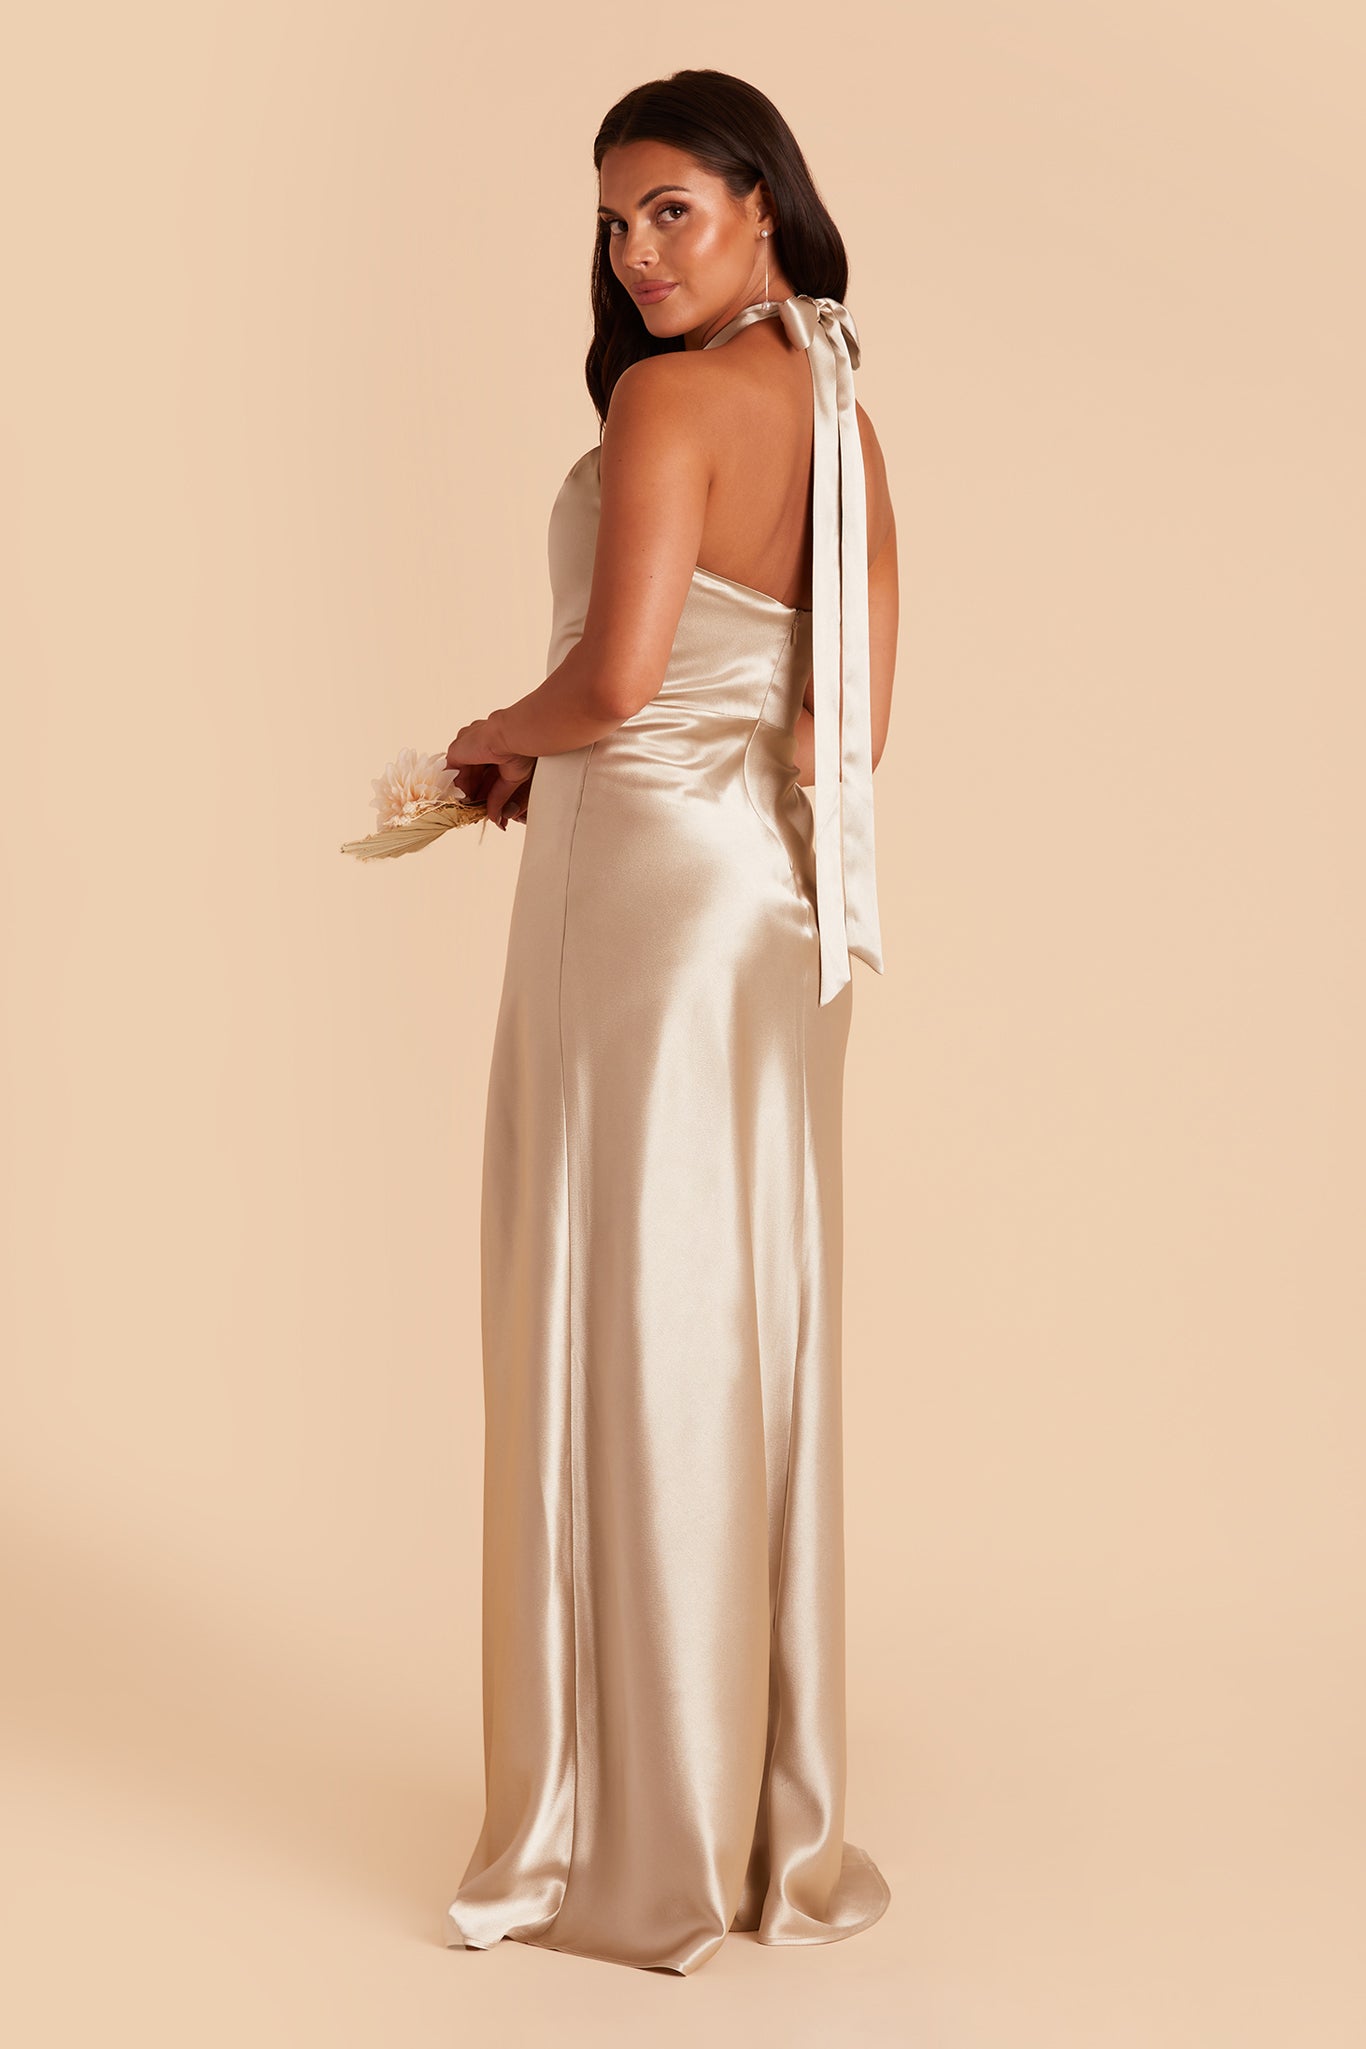 Side view of the Monica Dress in neutral champagne satin shows a model with the halter back tied in a bow at the back of their neck with the long tie ends draping along the back to the backside. The dress conforms to the model's body along the back and hips flaring slightly to the feet.